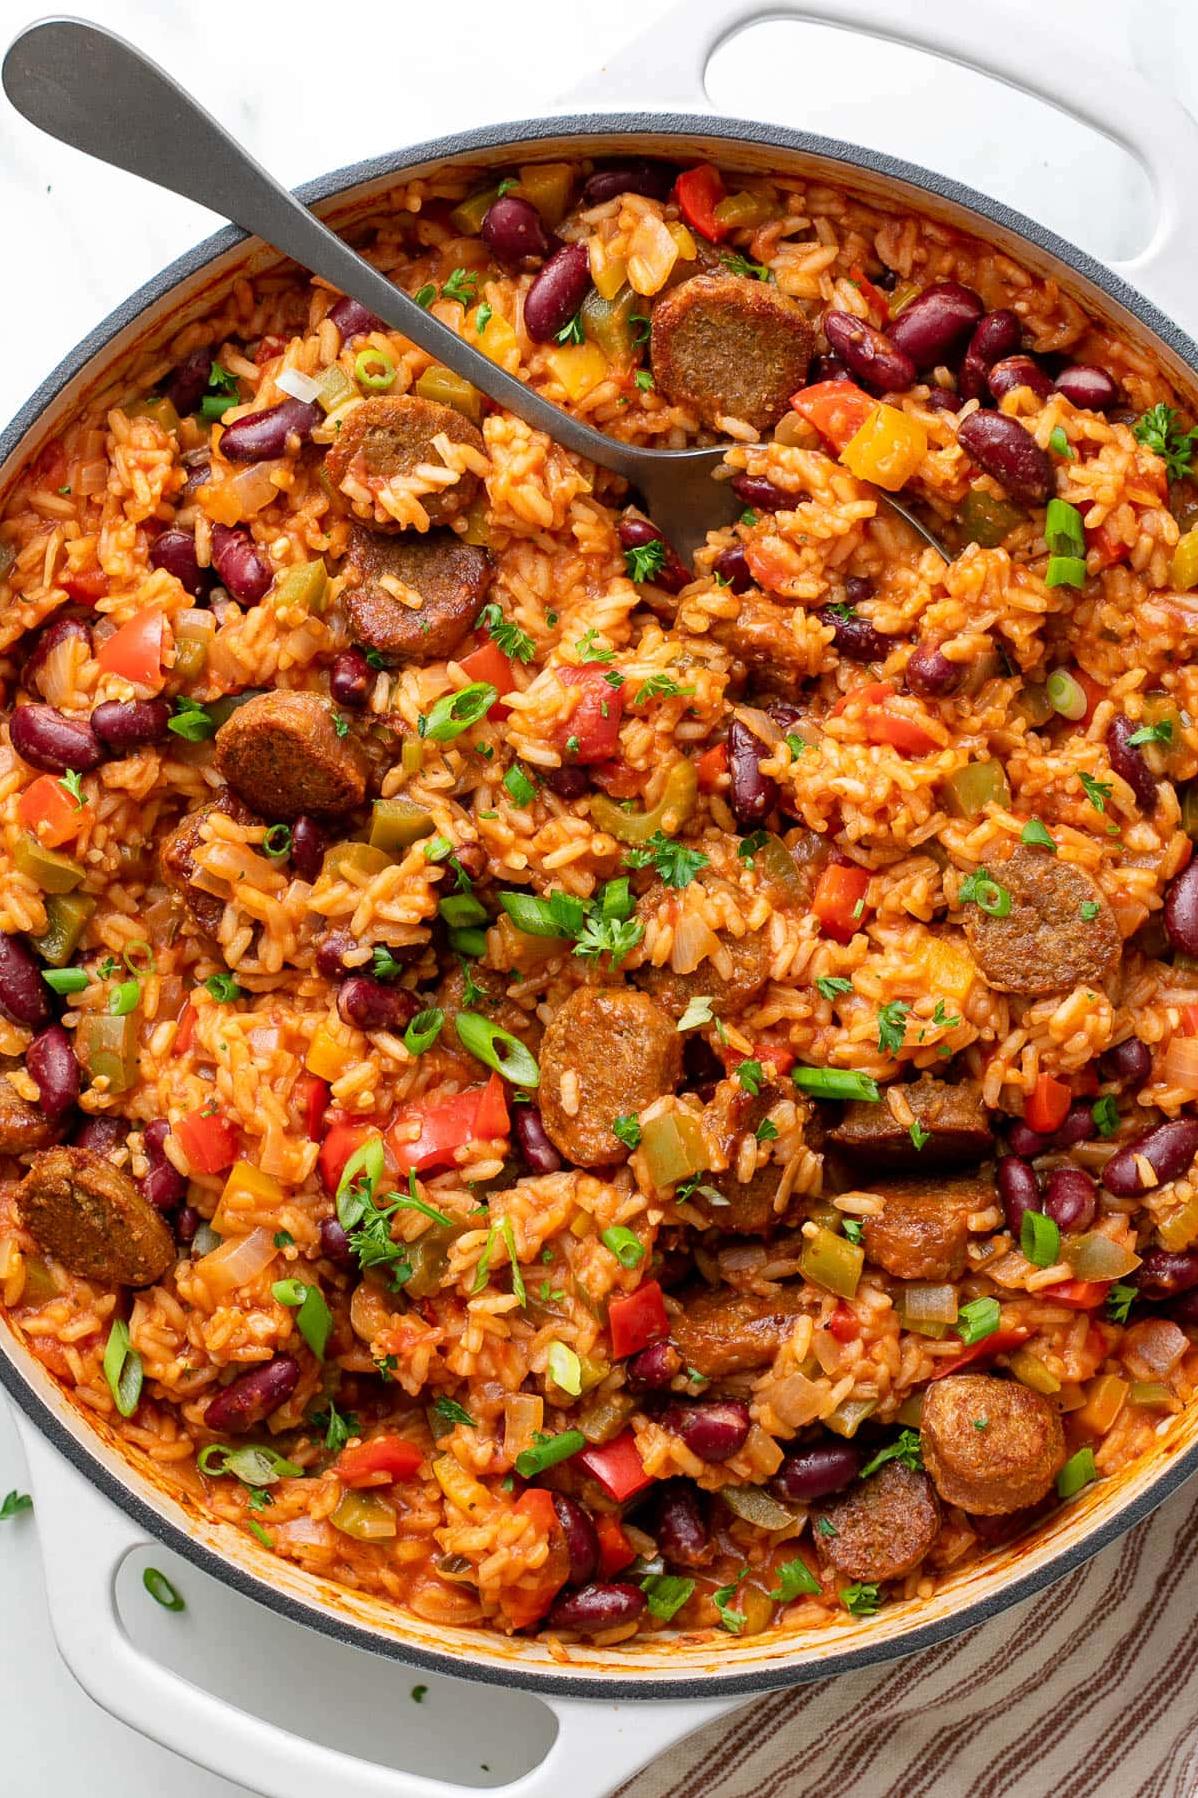  Vibrant veggies and bold spices make this vegetarian jambalaya a real showstopper.